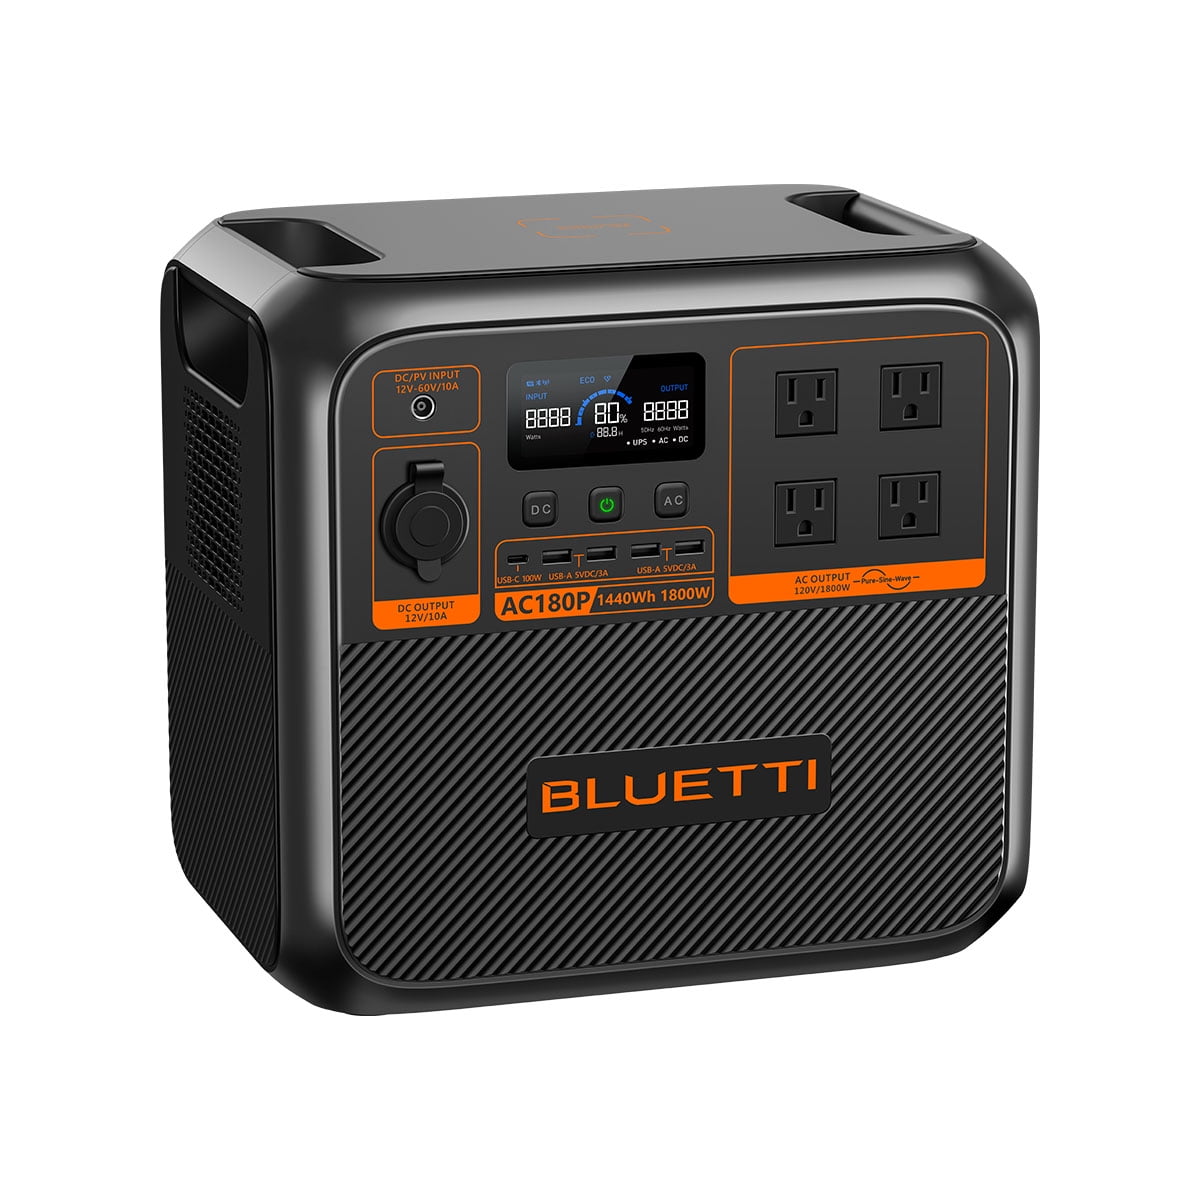 Bluetti Portable Power Station,EB70S Solar Generator,W/200W Solar Panel, 716Wh Capacity,800W AC Output (1400W Peak), for Outdoor Camping,Home Use, Emergency,Used,Certified Reconditioned 